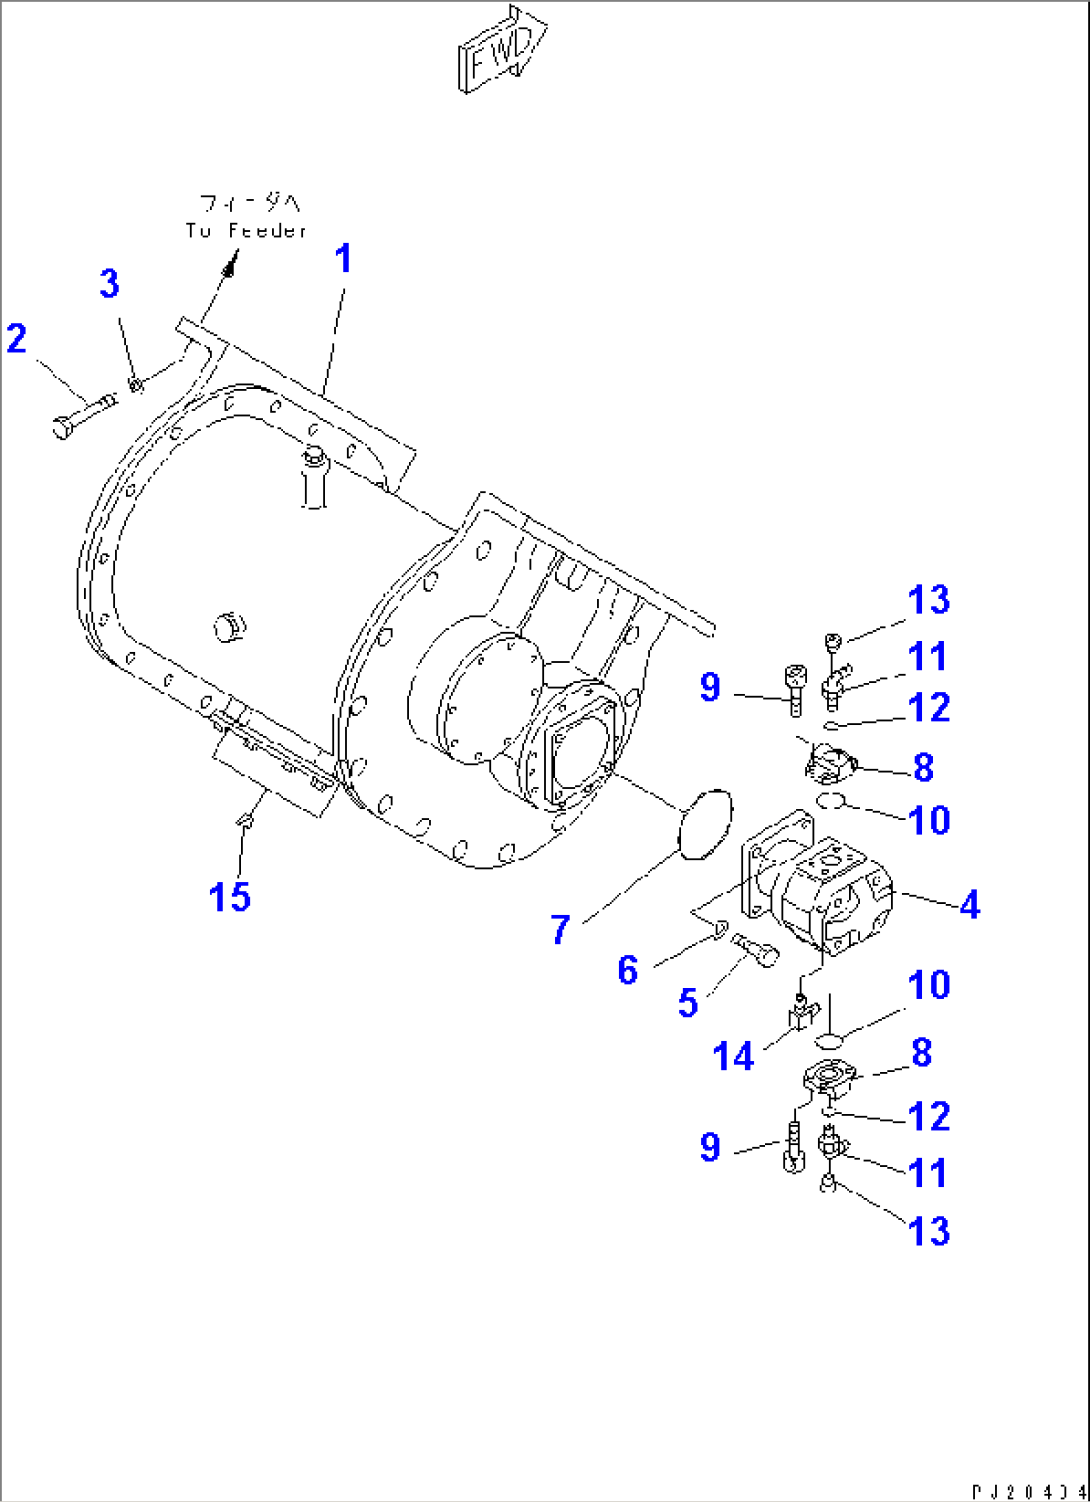 VIBRATOR (FEEDER MOTOR AND RELATED PARTS)